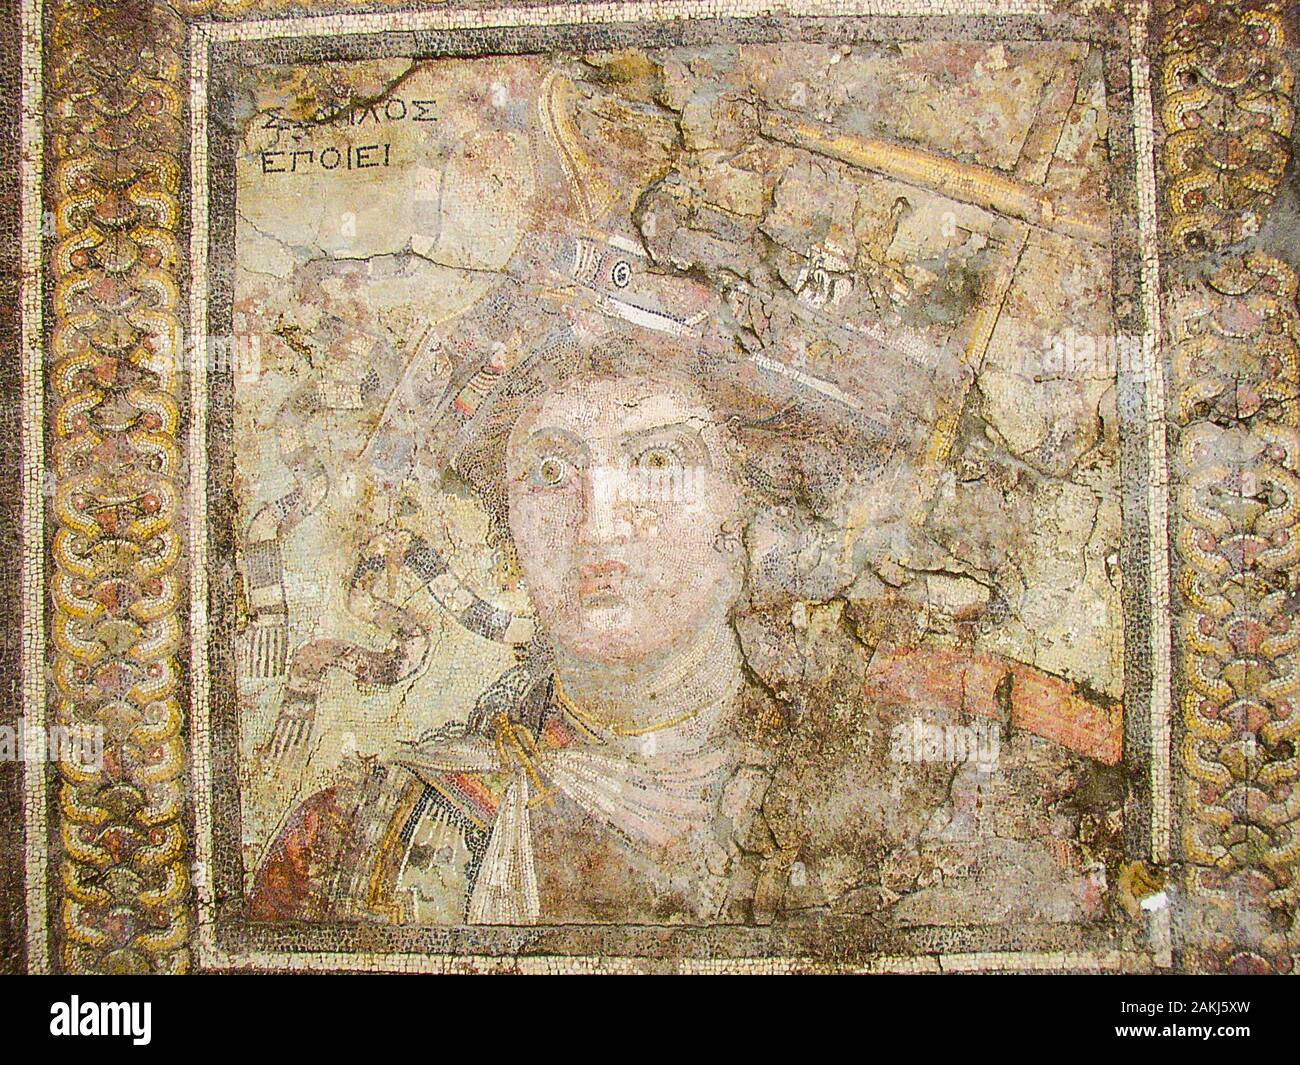 Egypt, Alexandria, Graeco-Roman Museum, mosaic depicting Berenice II, wife of  de Ptolemy III. The crown of the queen is actually a boat. Stock Photo